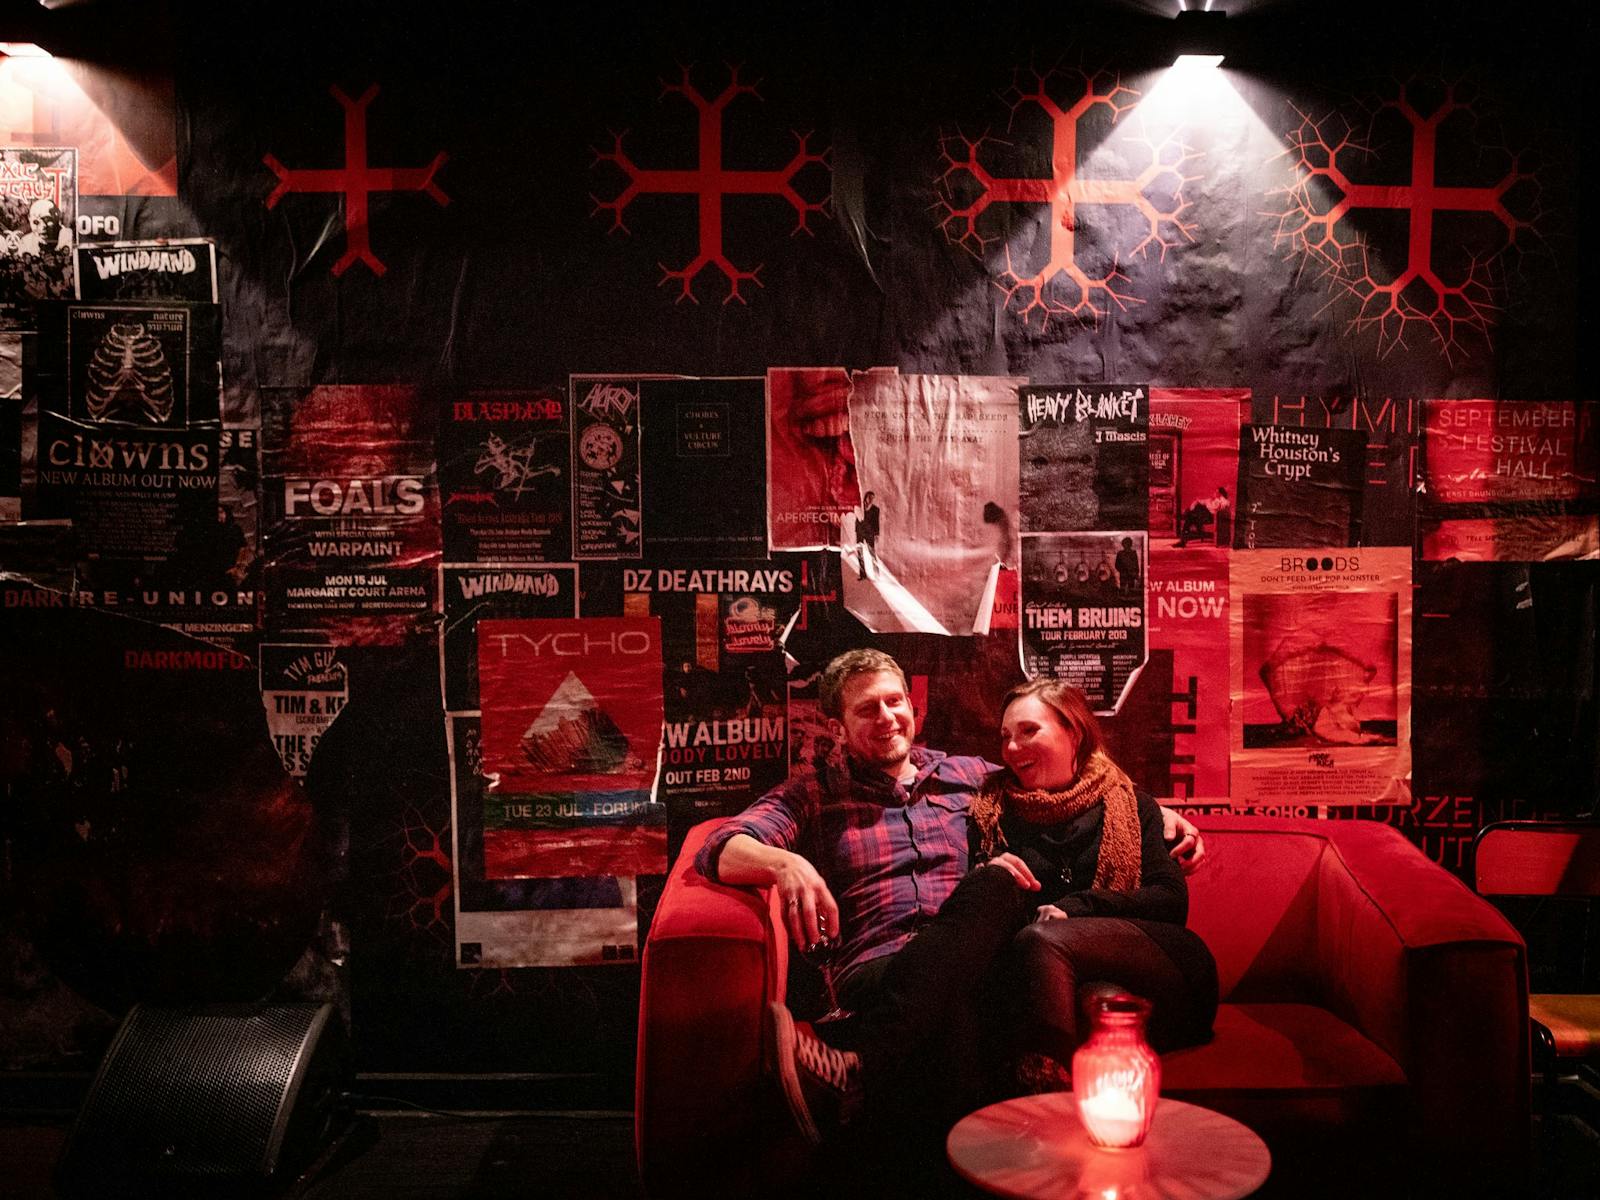 A man and a woman sitting on a couch laughing by candlelight in Altar's red-lit lounge bar